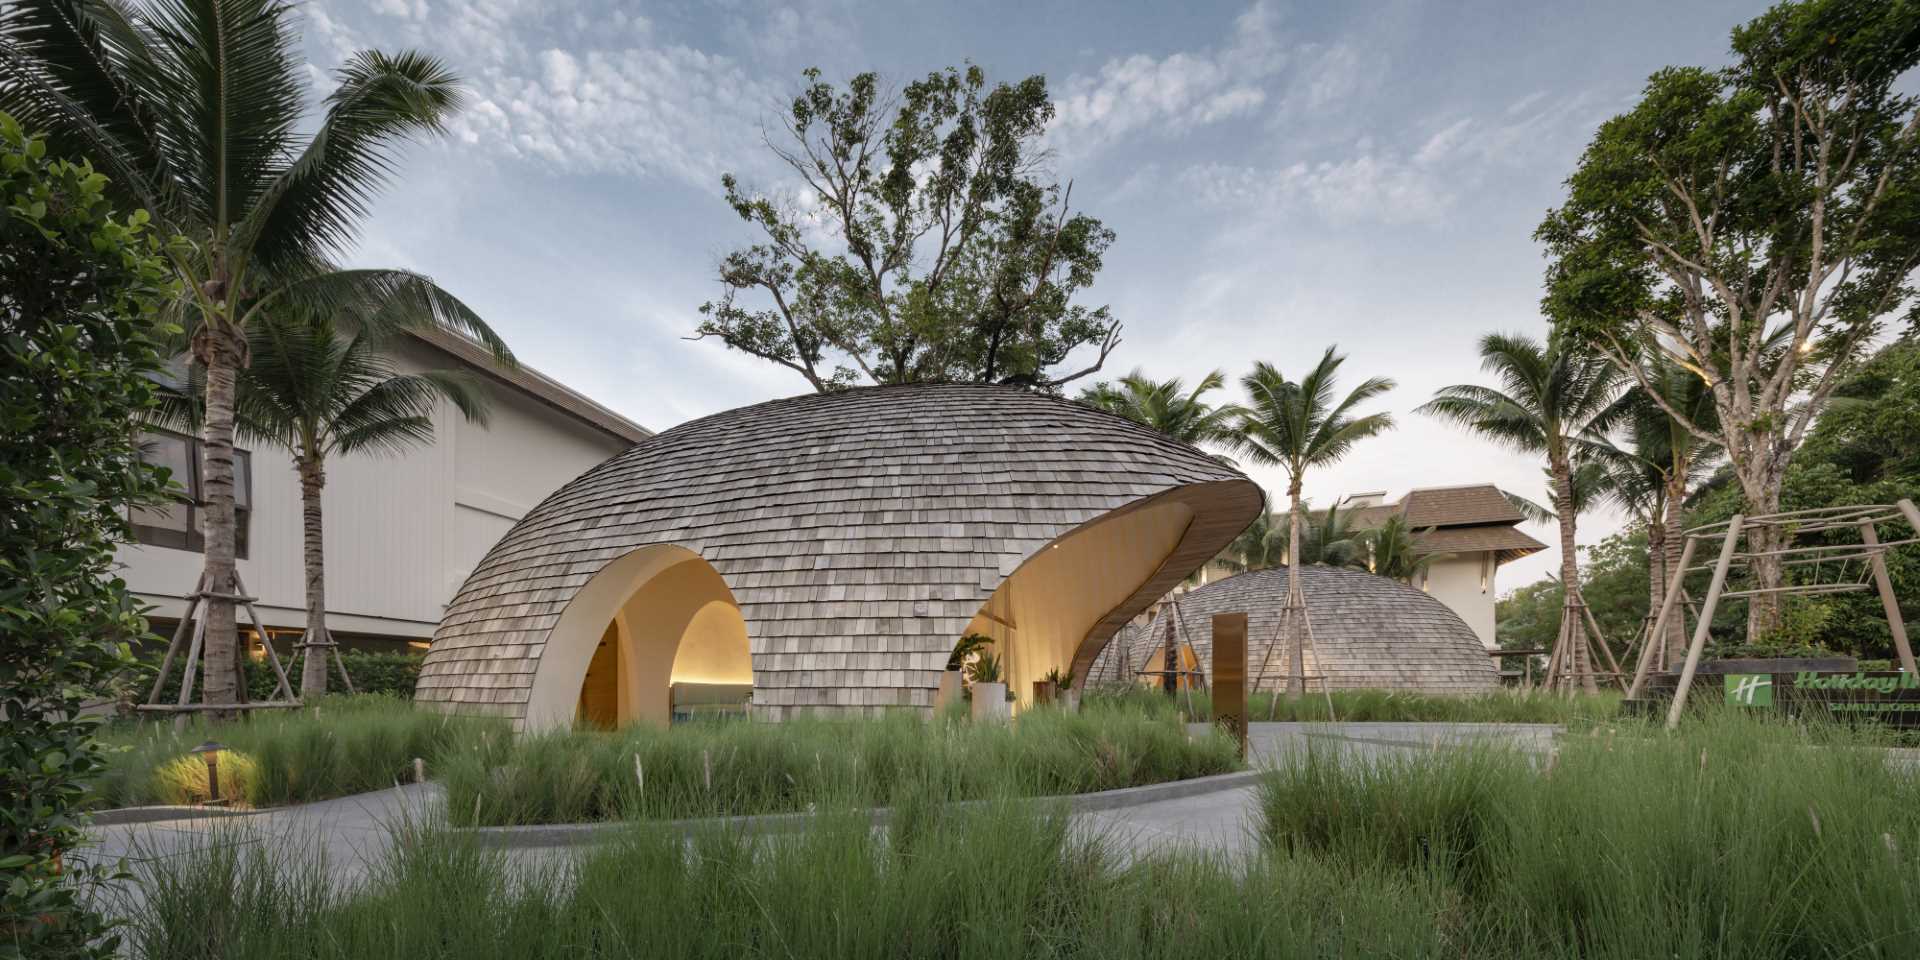 The Design Of This Shingle-Clad Hotel Lobby Was Inspired By A Coconut